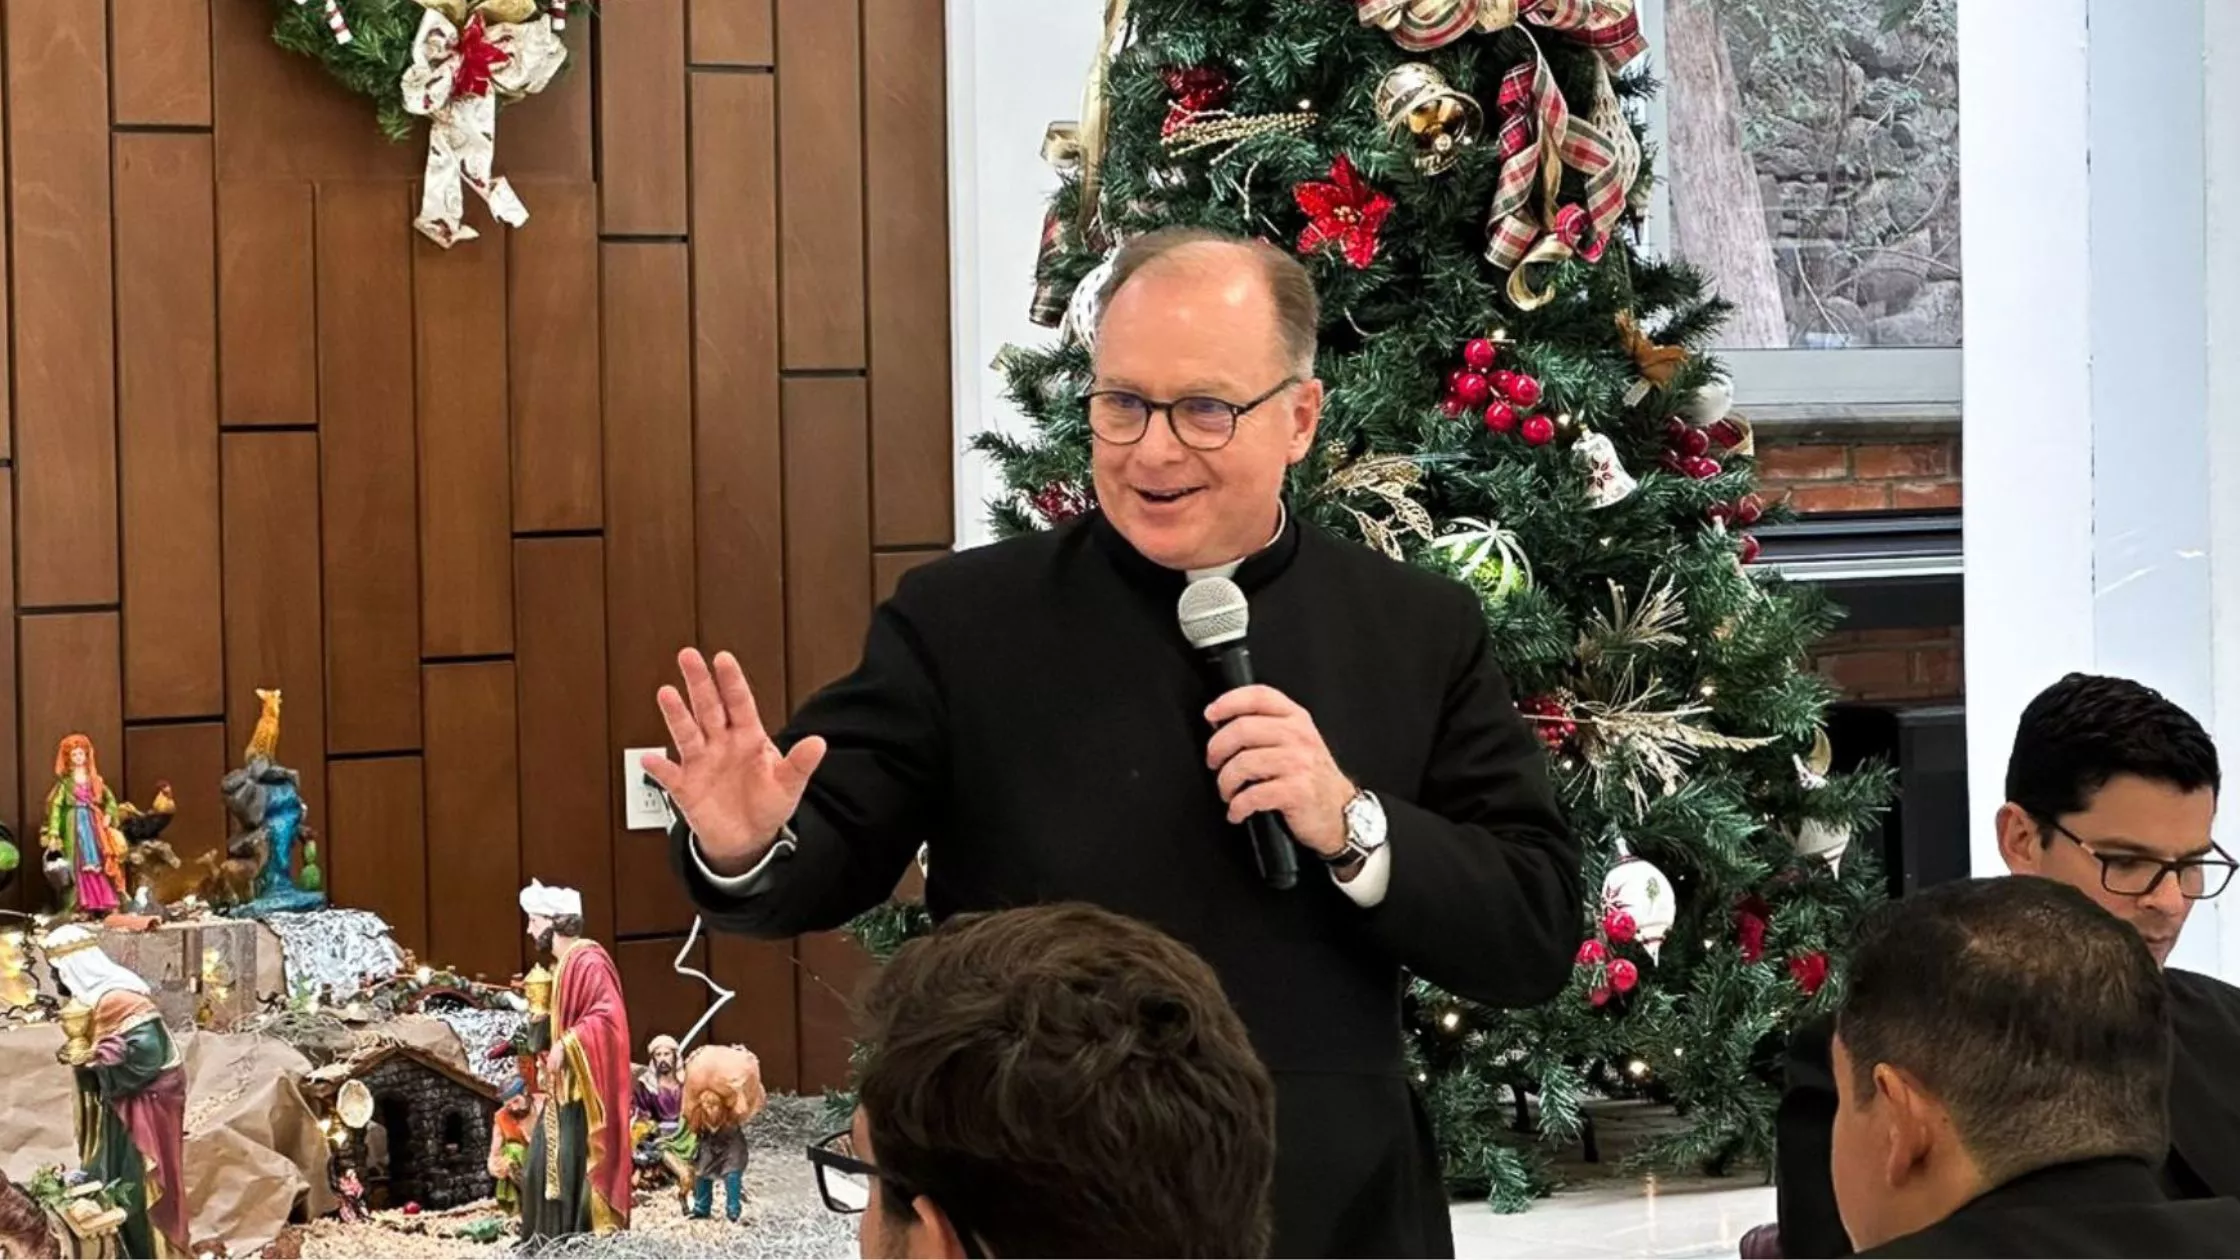 “God has given us talents and asks us for a response”: Fr. John Connor, LC, on his trip to Northern Mexico